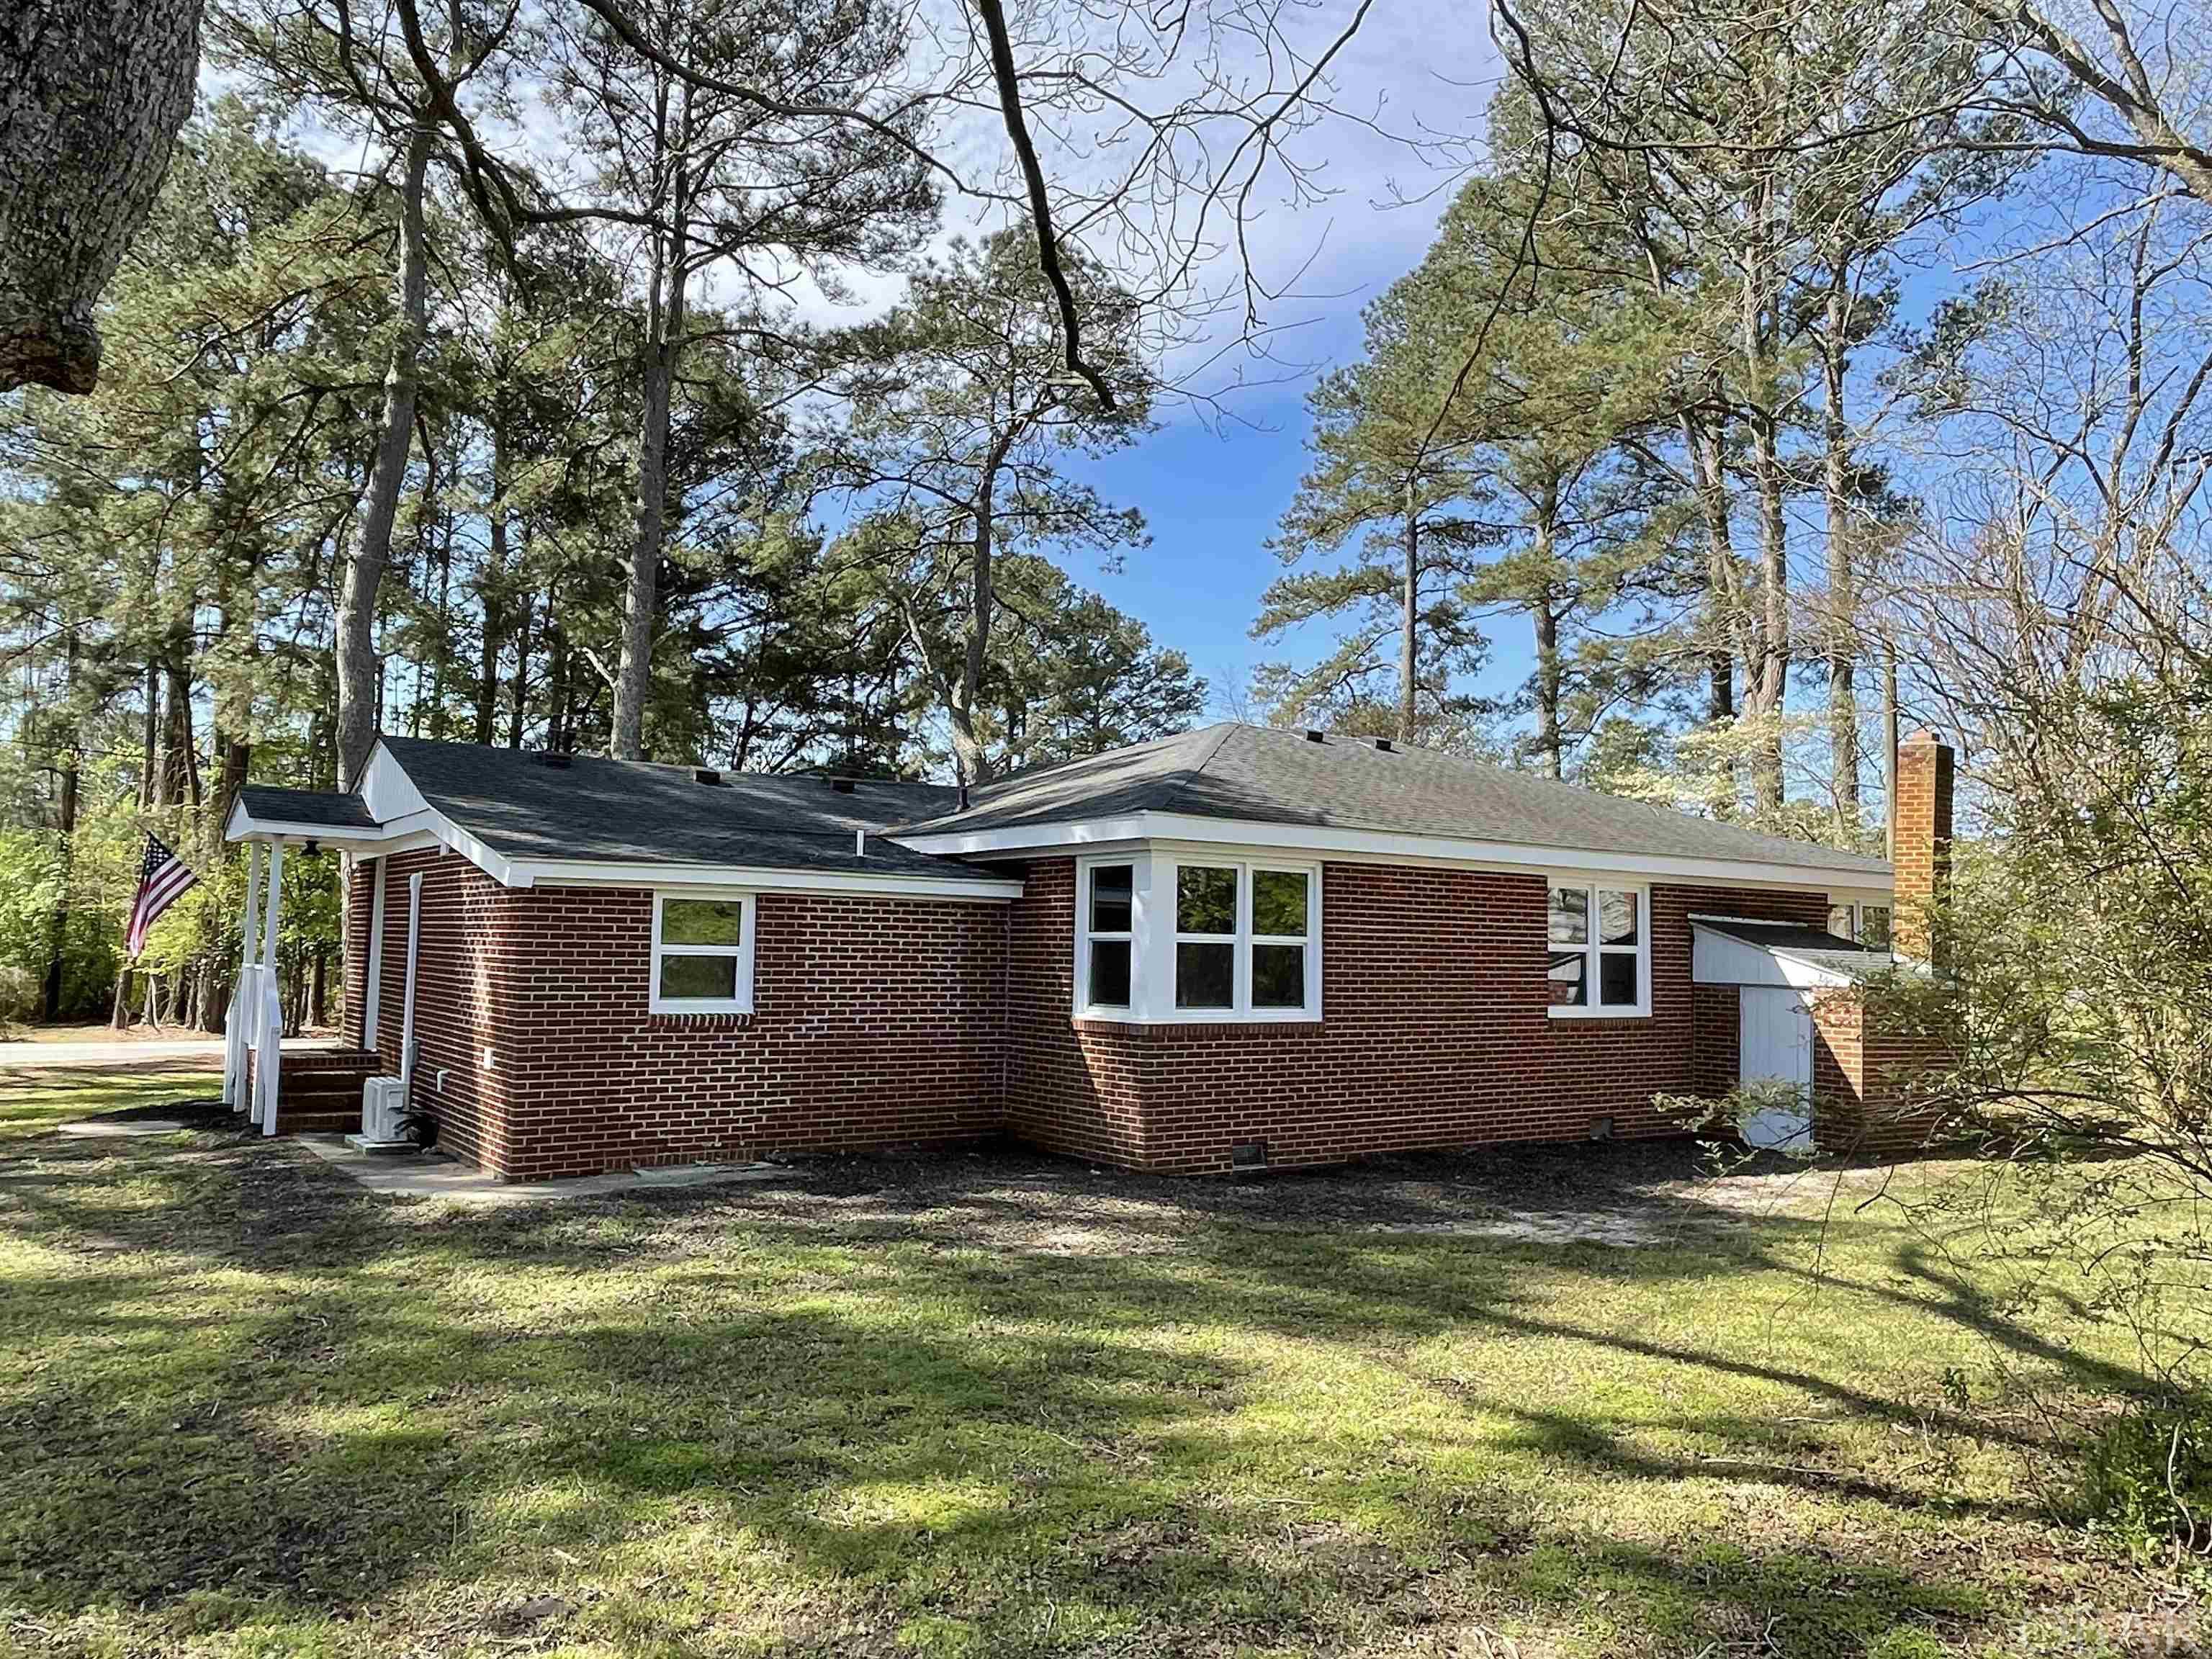 1223 NC 137, Eure, NC 27935, 3 Bedrooms Bedrooms, ,2 BathroomsBathrooms,Residential,For sale,NC 137,123793